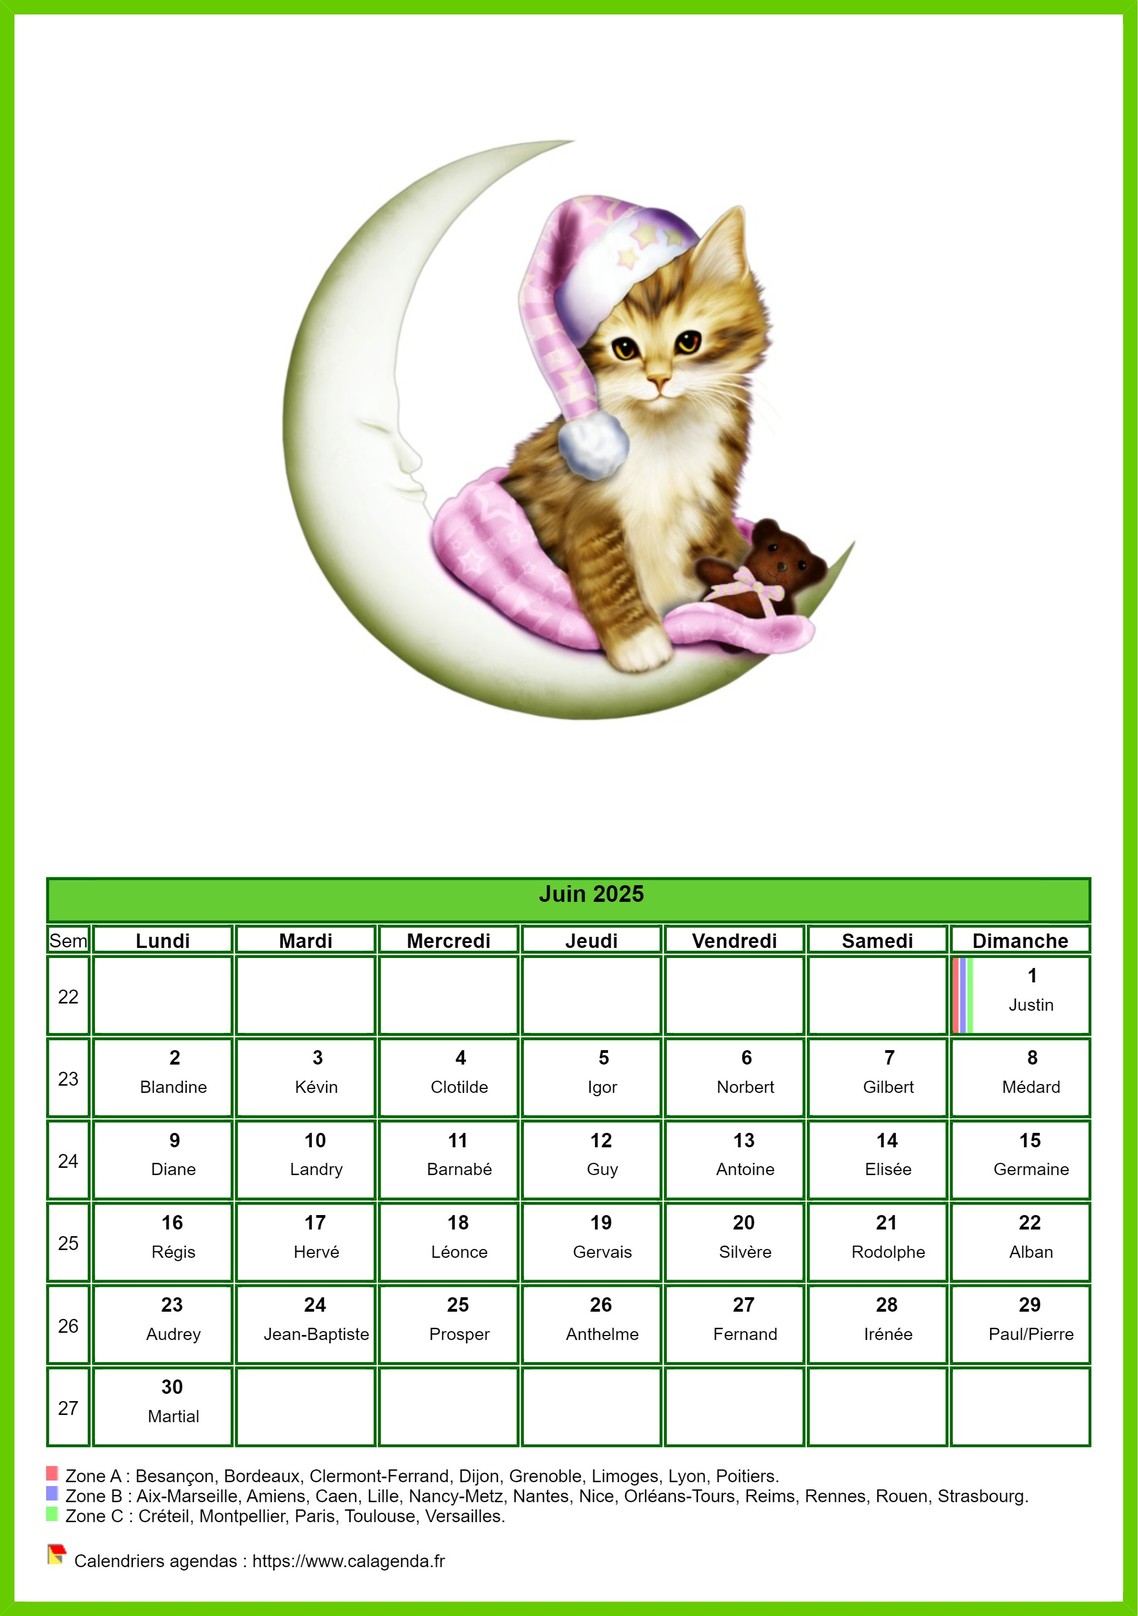 Calendrier juin 2025 chats